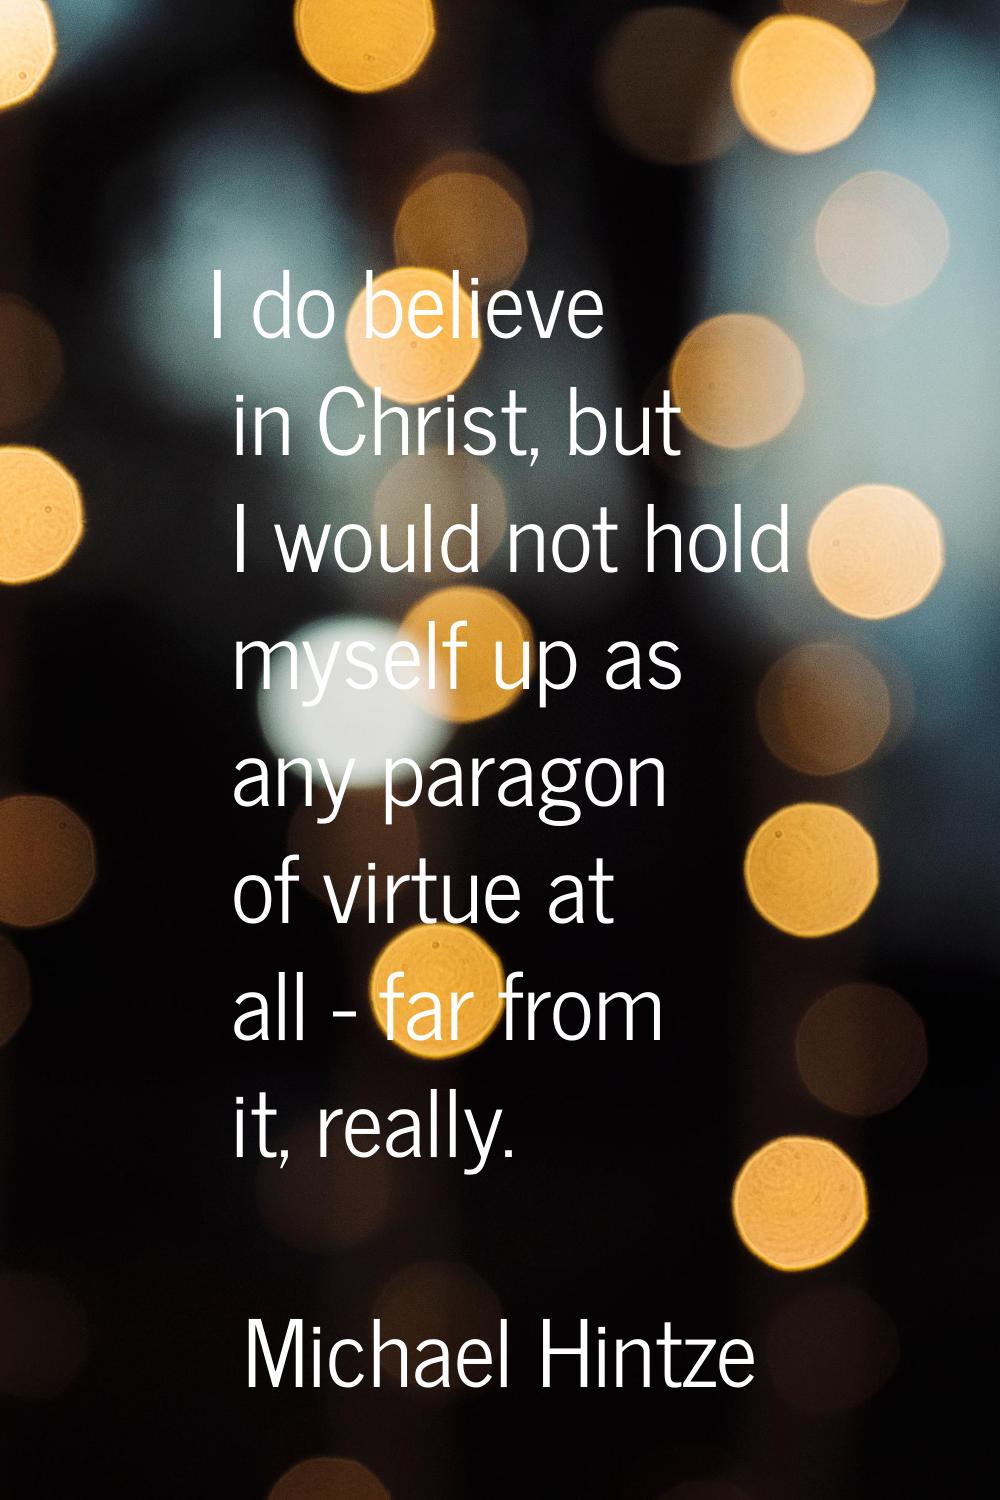 I do believe in Christ, but I would not hold myself up as any paragon of virtue at all - far from i